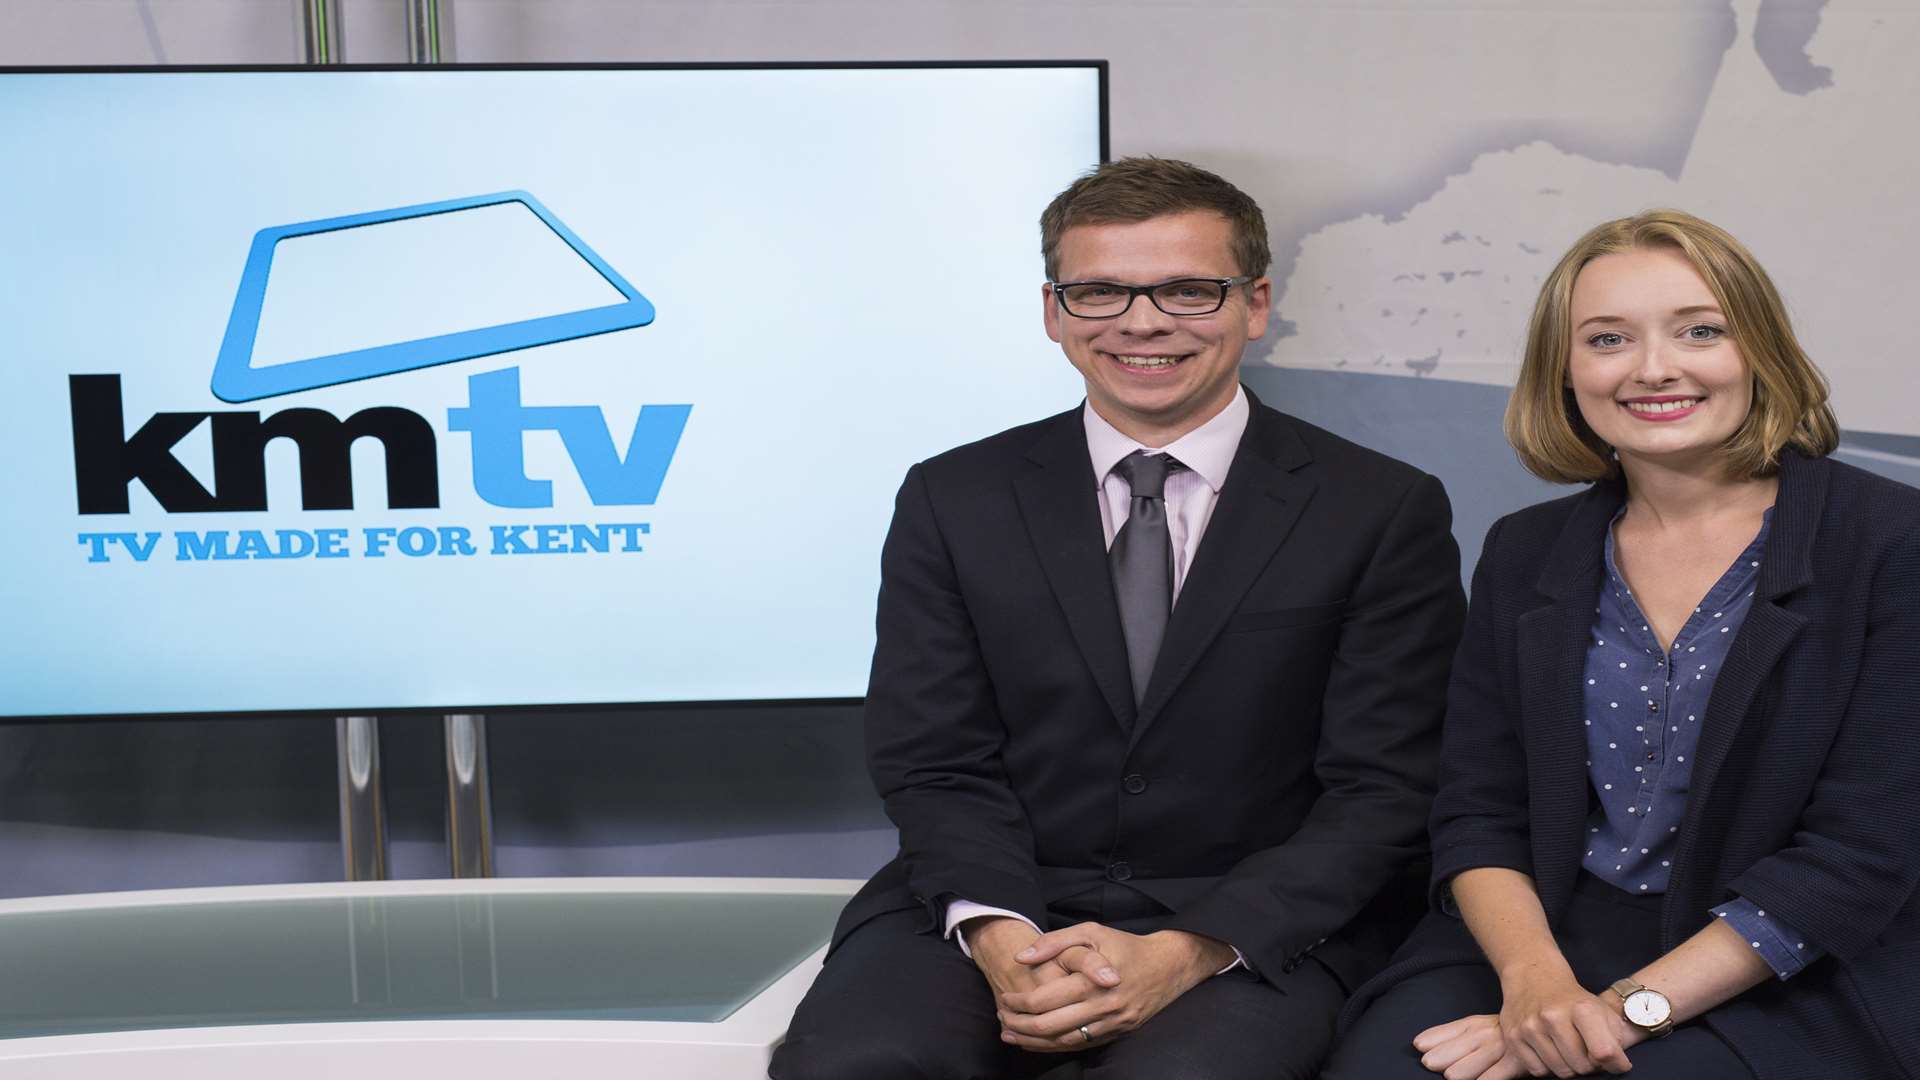 KMTV's Andy Richards and Louisa Britton